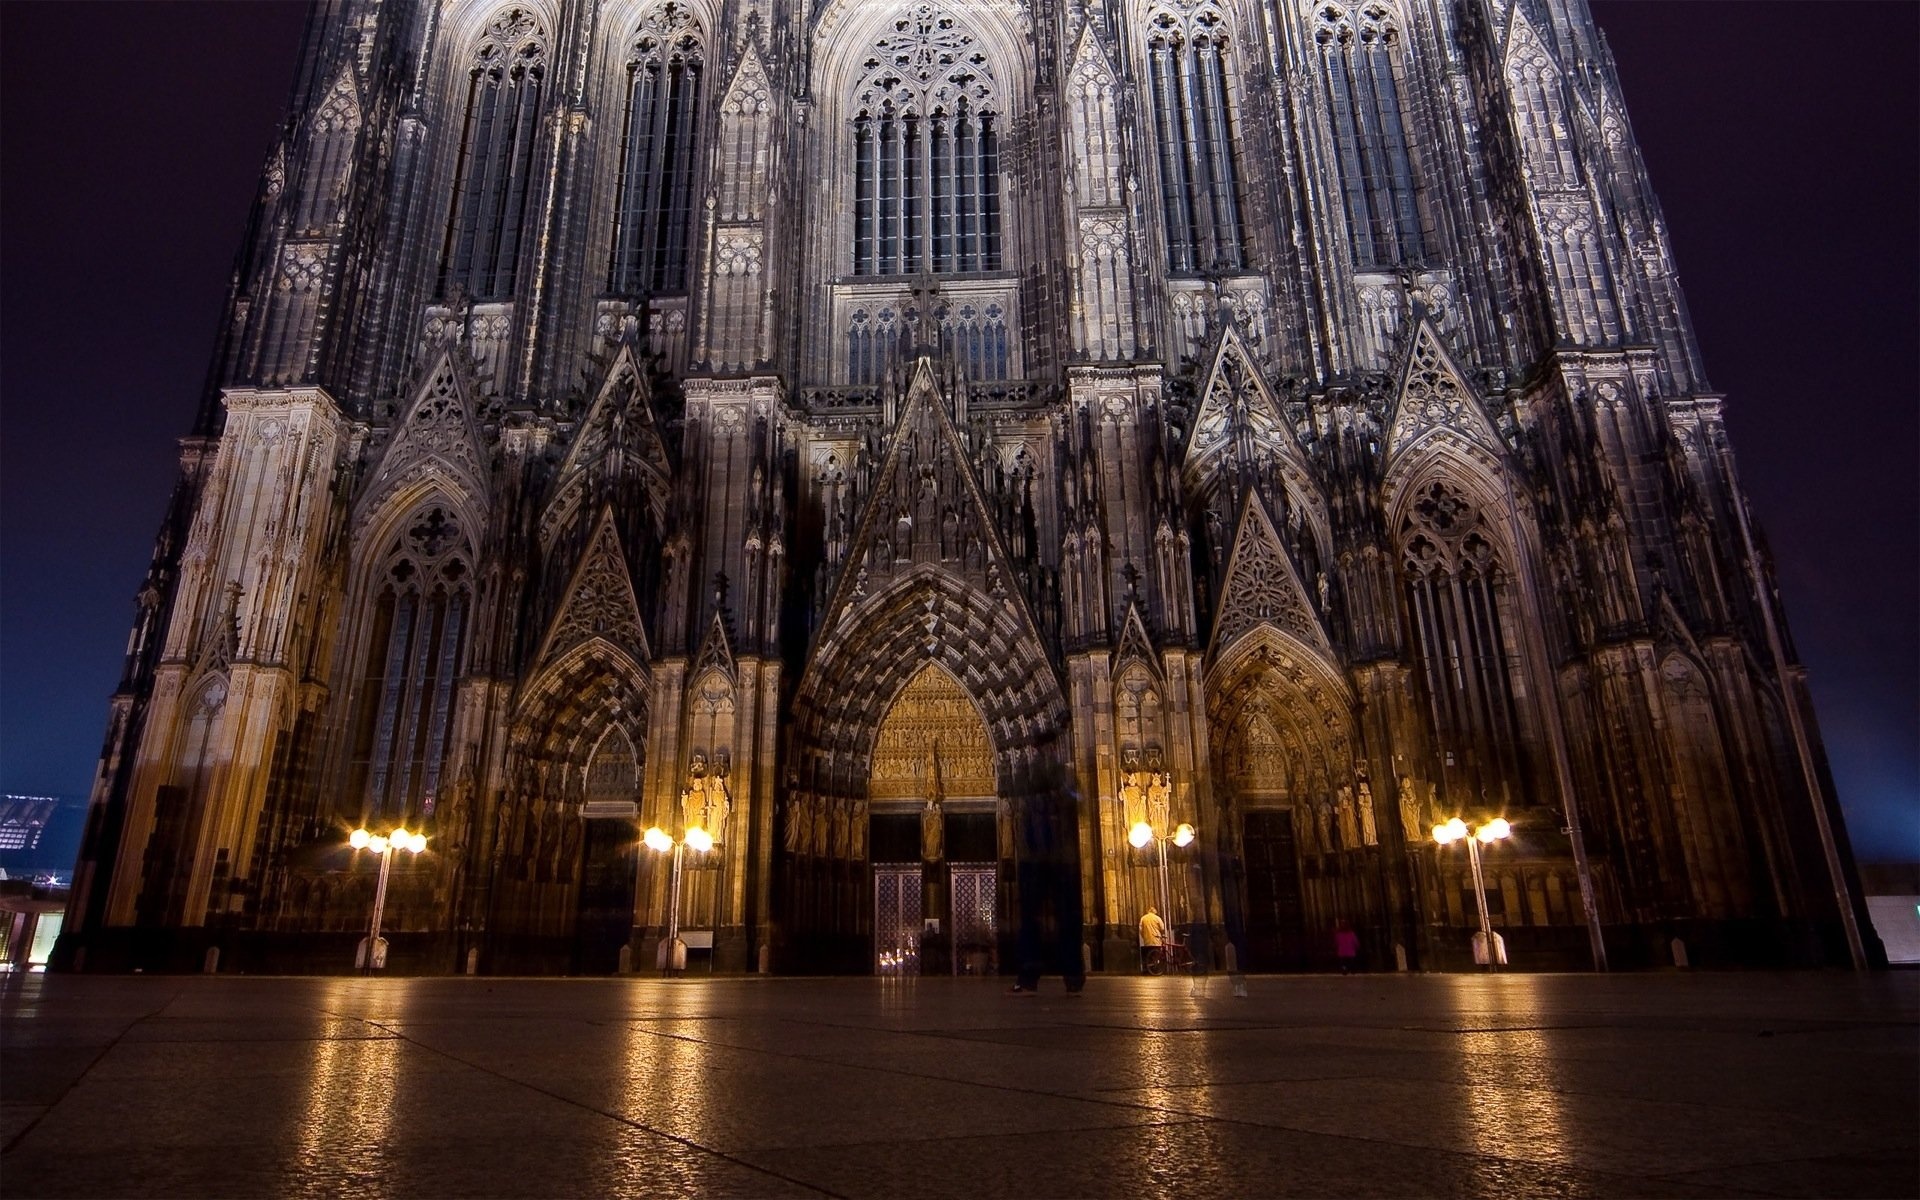 Cologne Cathedral wallpapers, Background images, Gothic architecture, Tourist attraction, 1920x1200 HD Desktop